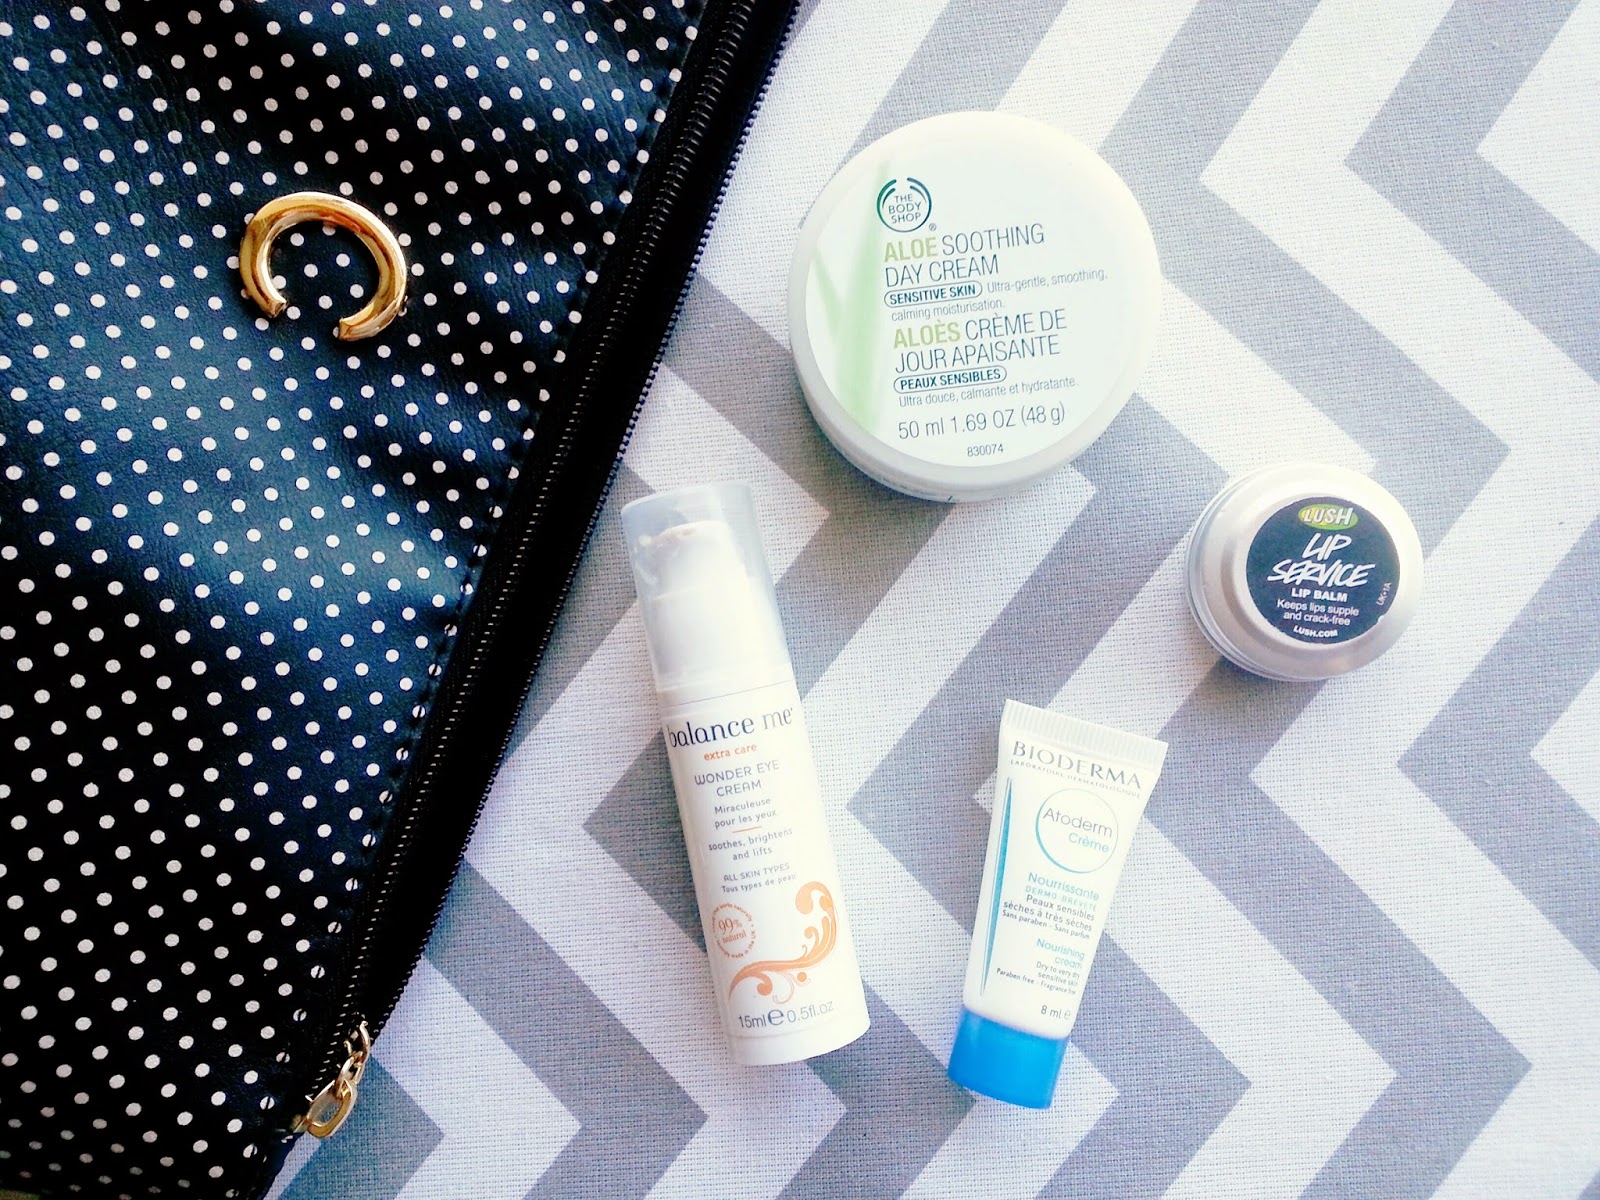 The Sick Day Morning Skin Care Routine